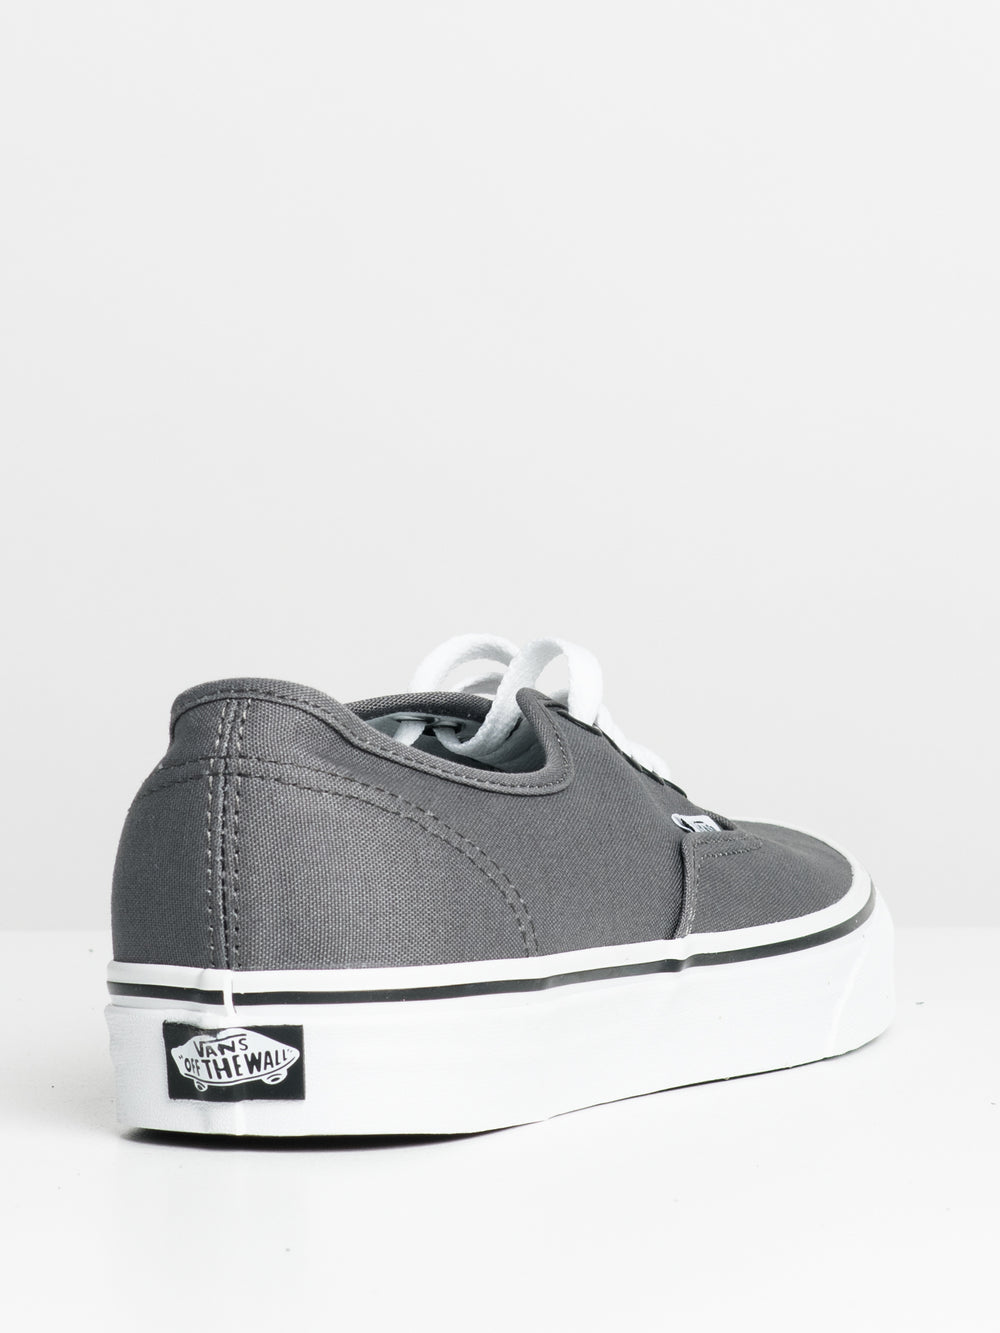 MENS VANS AUTHENTIC PEWTER/WHITE SNEAKER - CLEARANCE